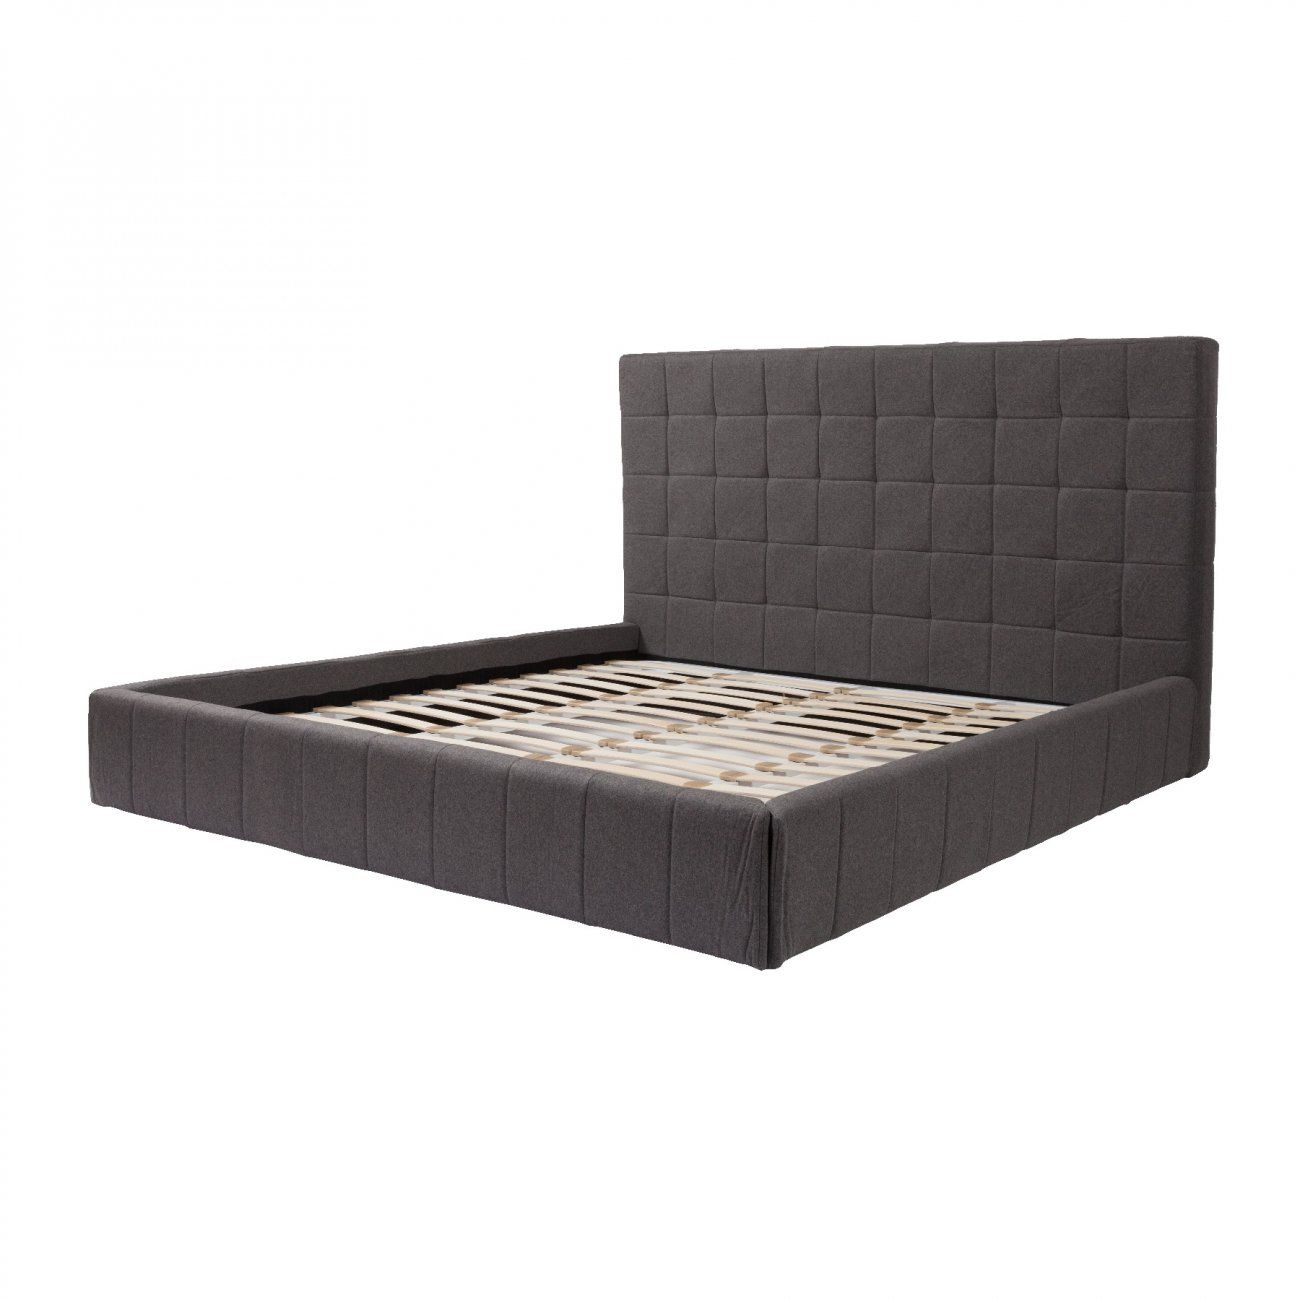 Double bed 160x200 grey Squaring Alto